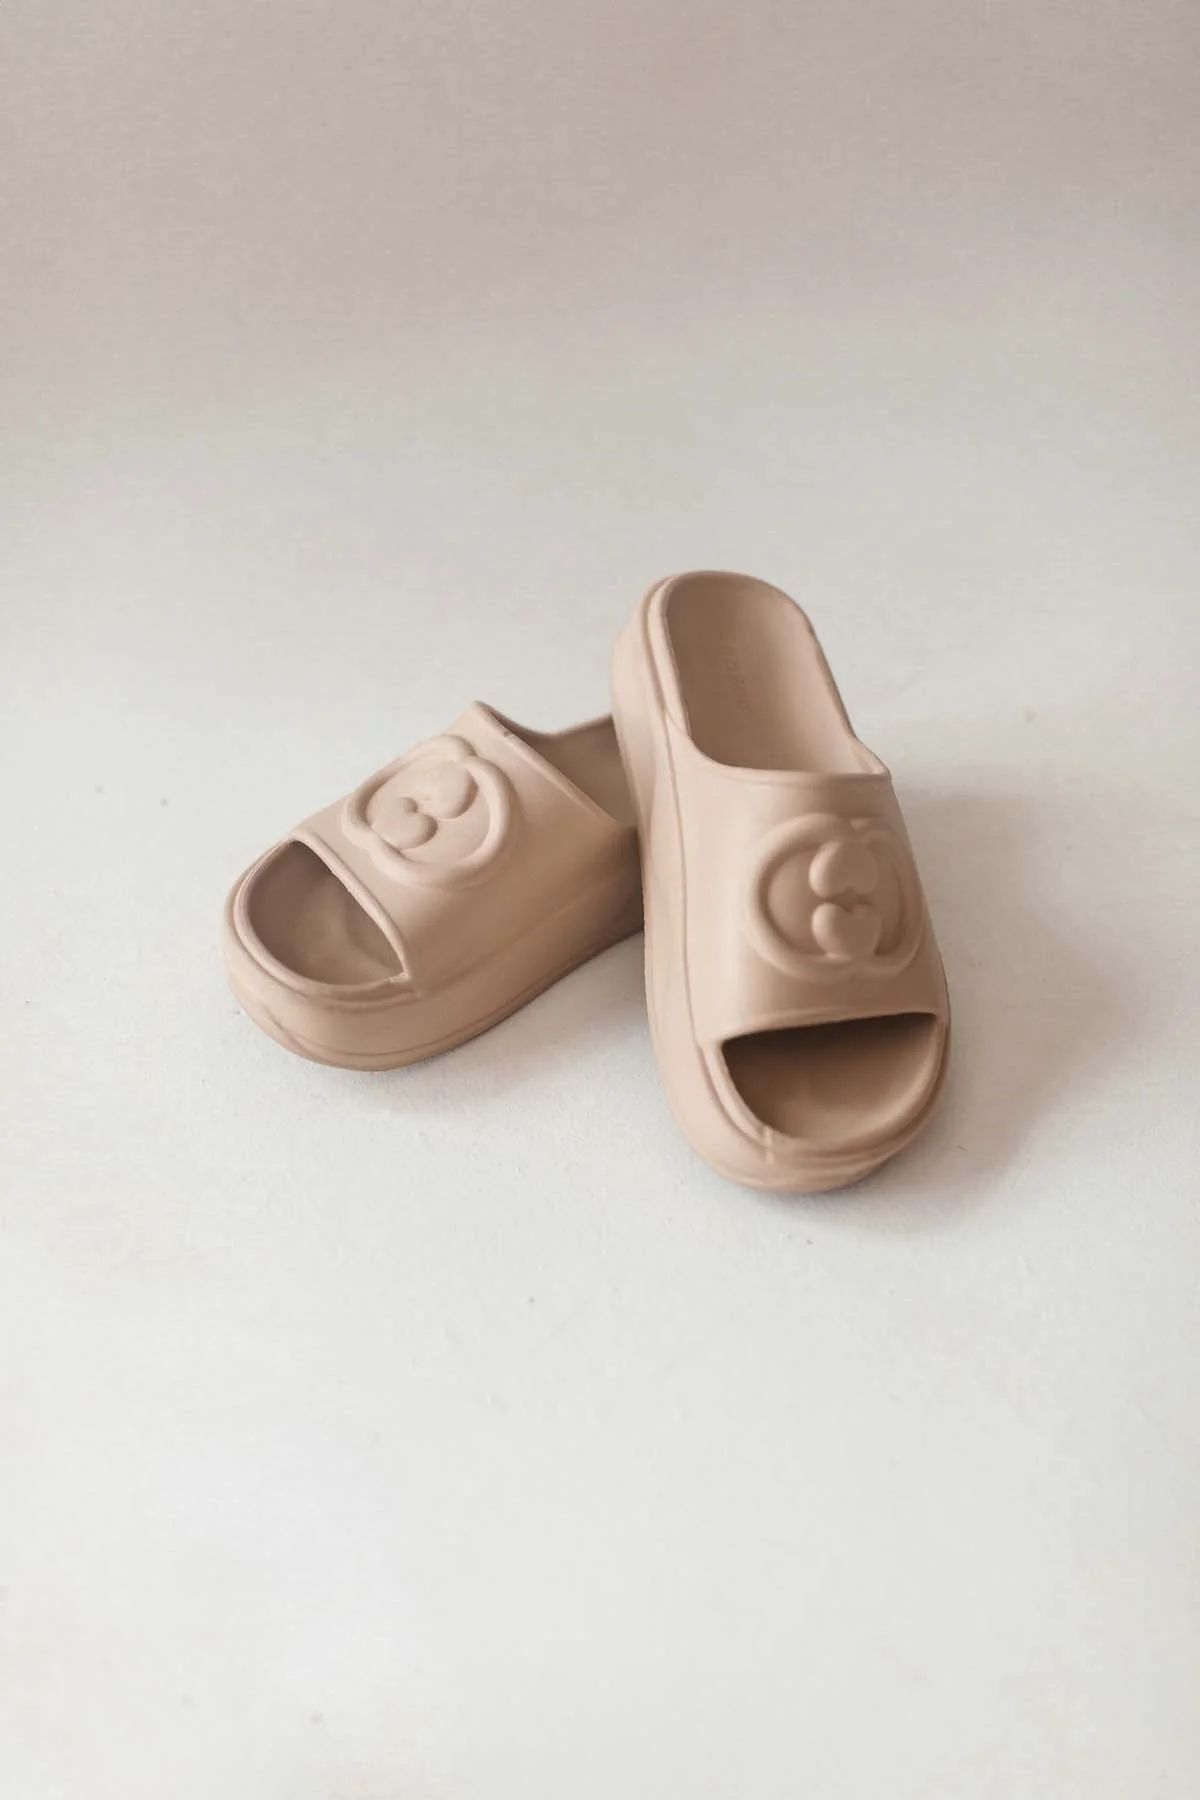 RESTOCK - Briana Taupe Chunky Slides | The Post